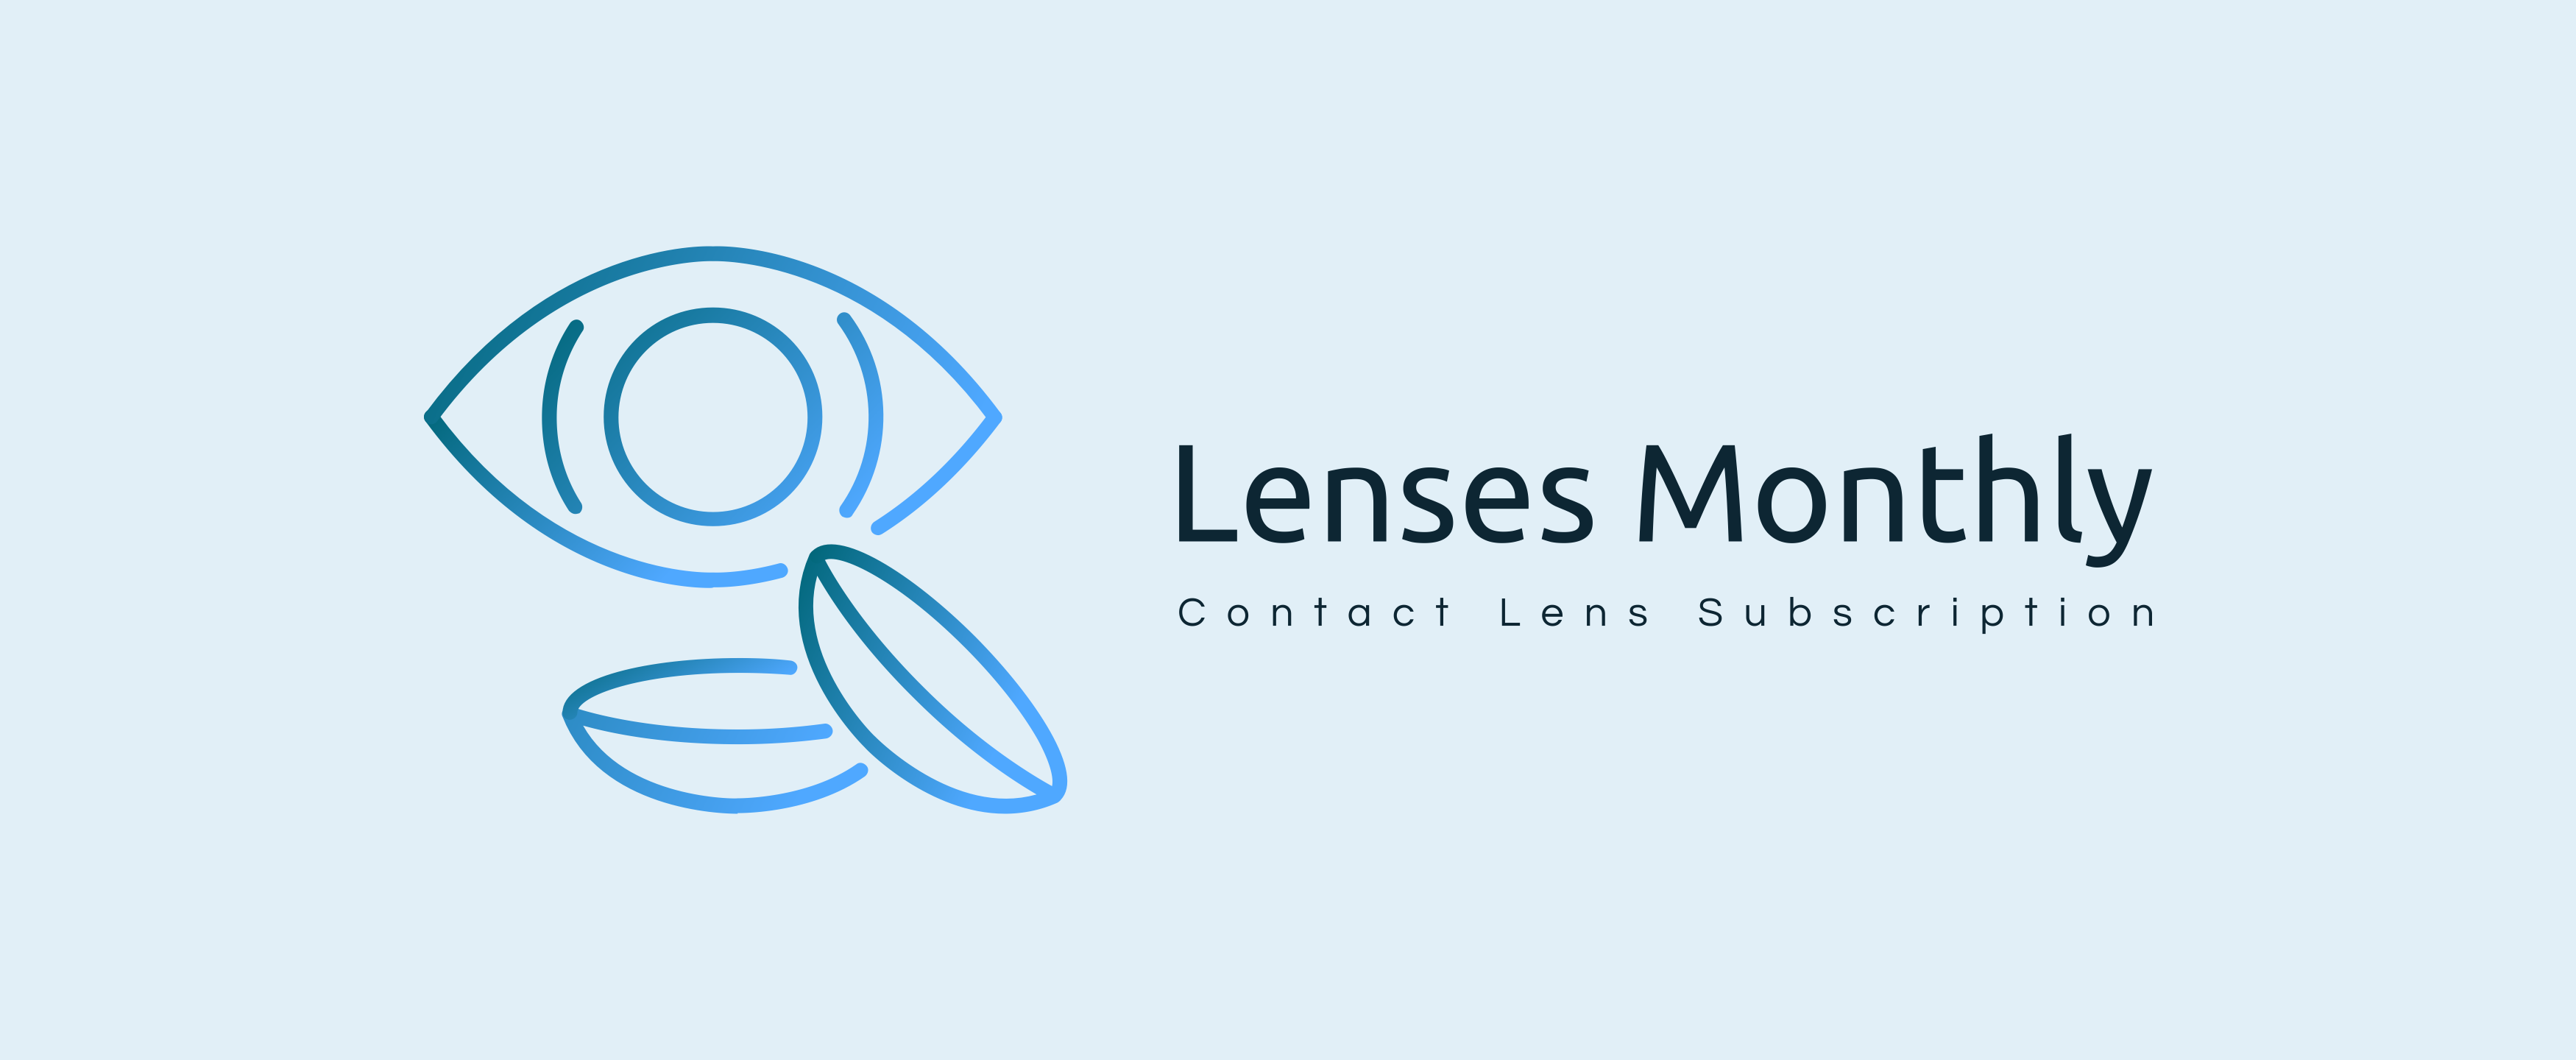 Lenses Monthly